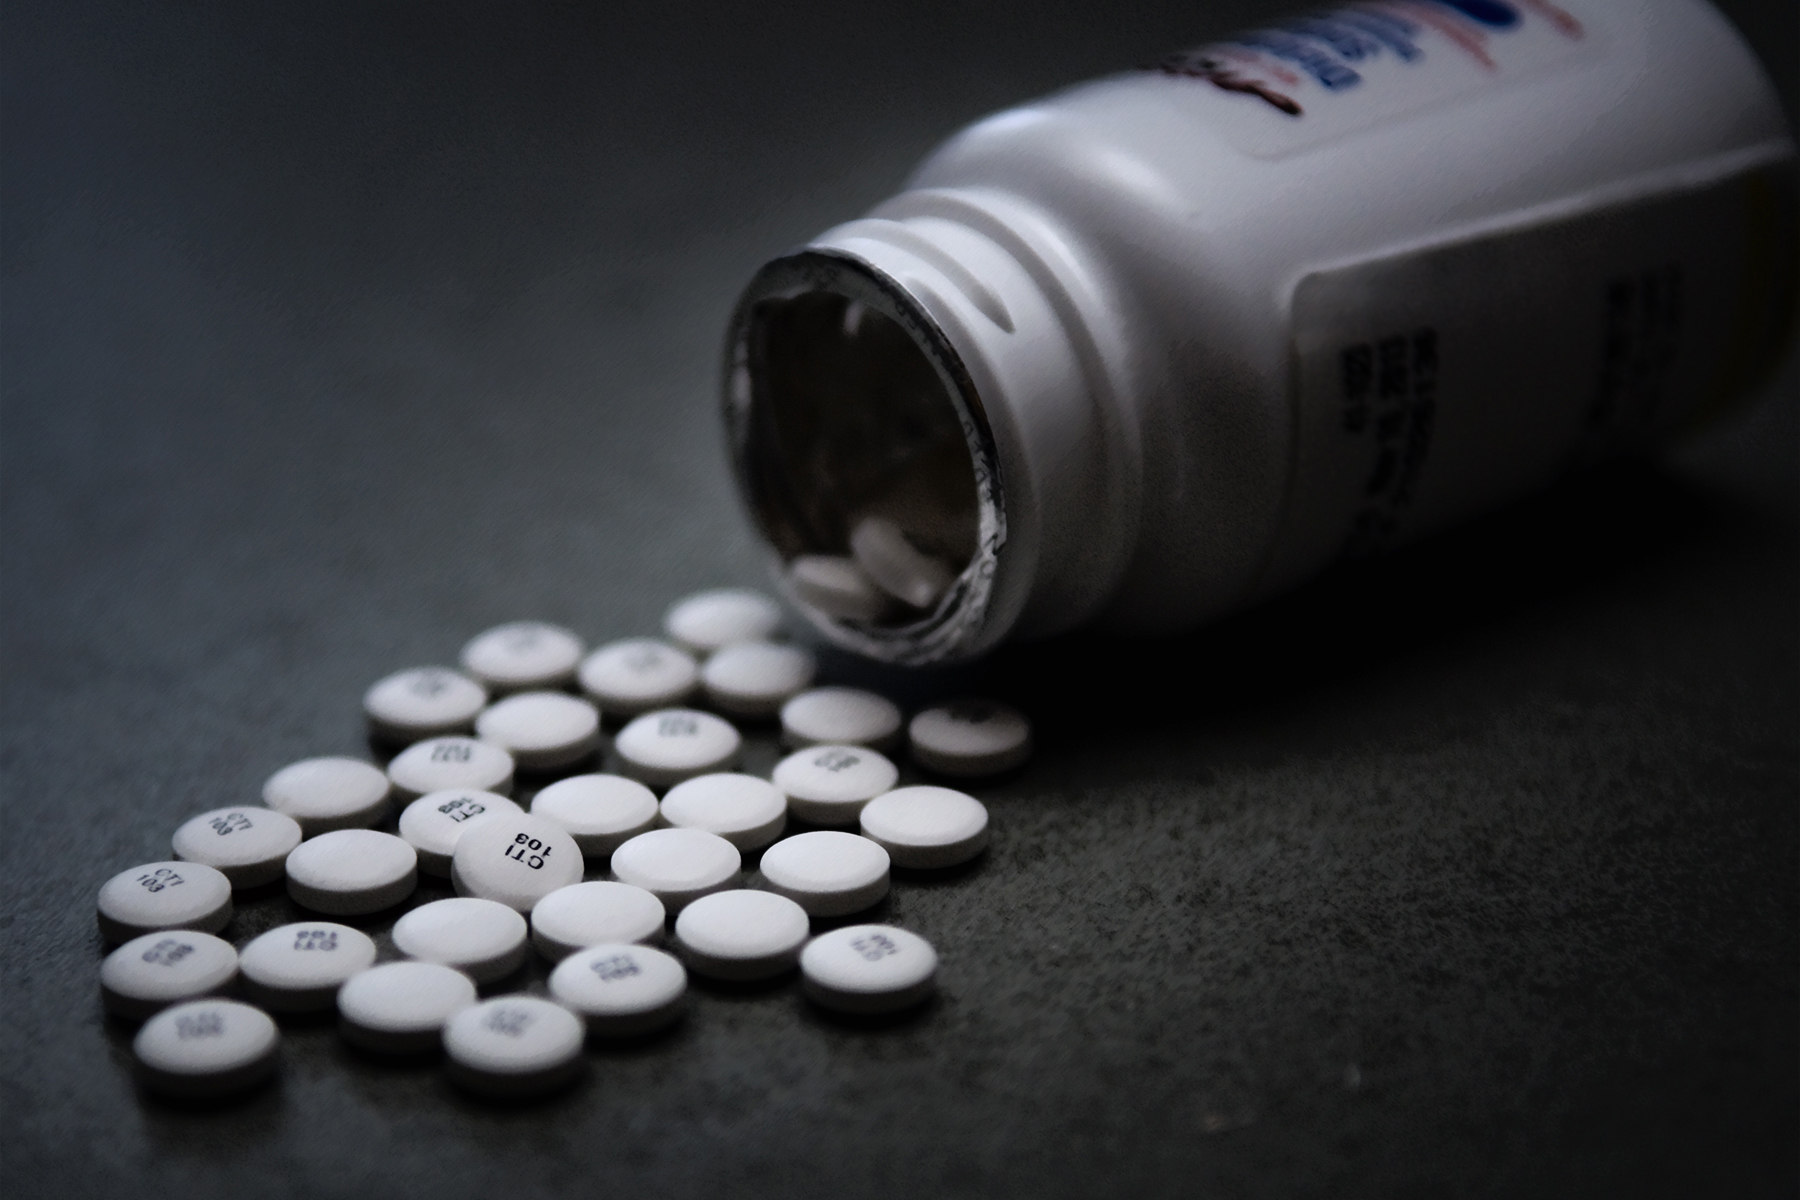 Prescription pain pills are seen dumped out on a table at Grissom Air Reserve Base, Ind. Airmen who take prescription pills that are not their own or are taken after the time allotted could find themselves facing severe discipline. (U.S. Air Force photo illustration/Tech. Sgt. Mark R. W. Orders-Woempner) 